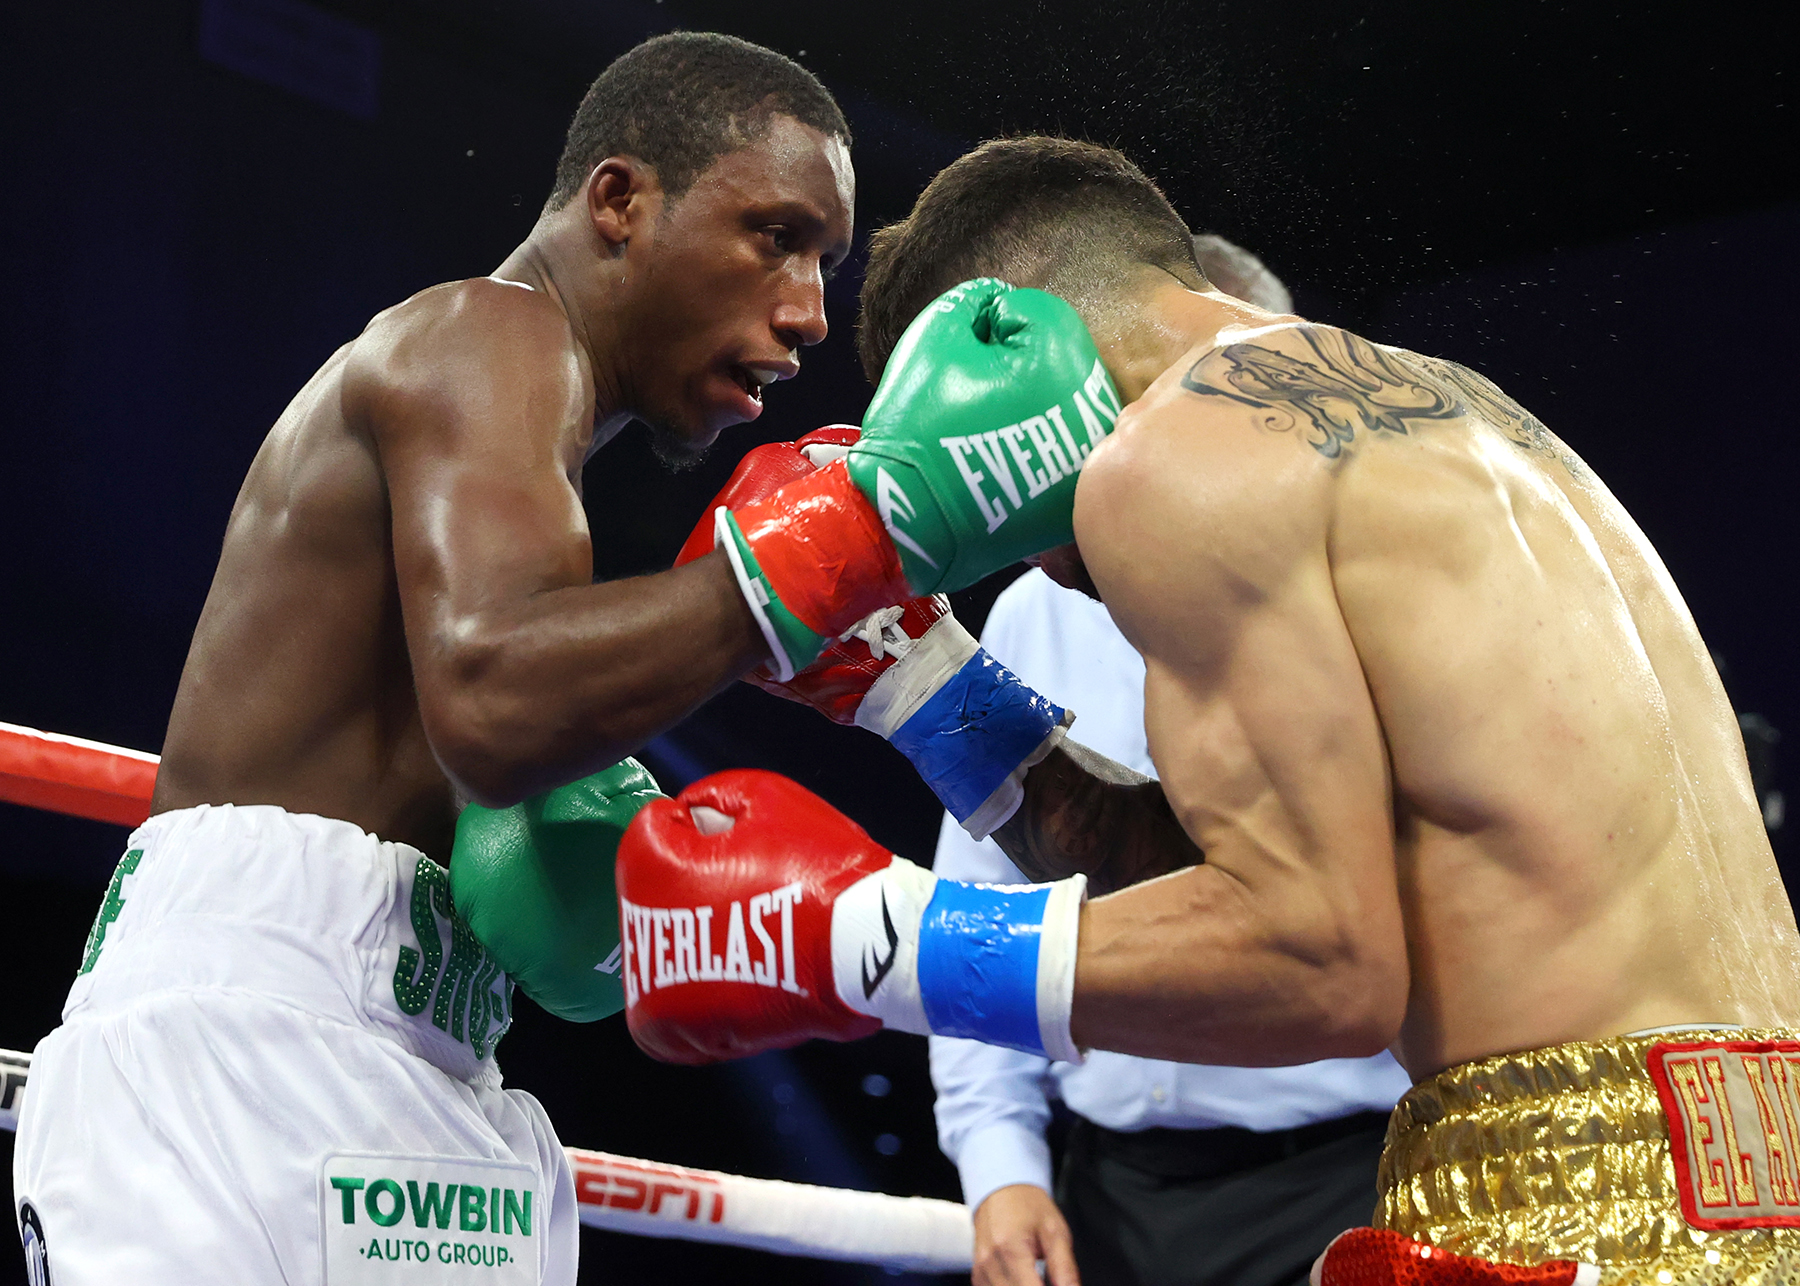 Carrington steals the Top Rank show with thunderous, marvelous knockout win